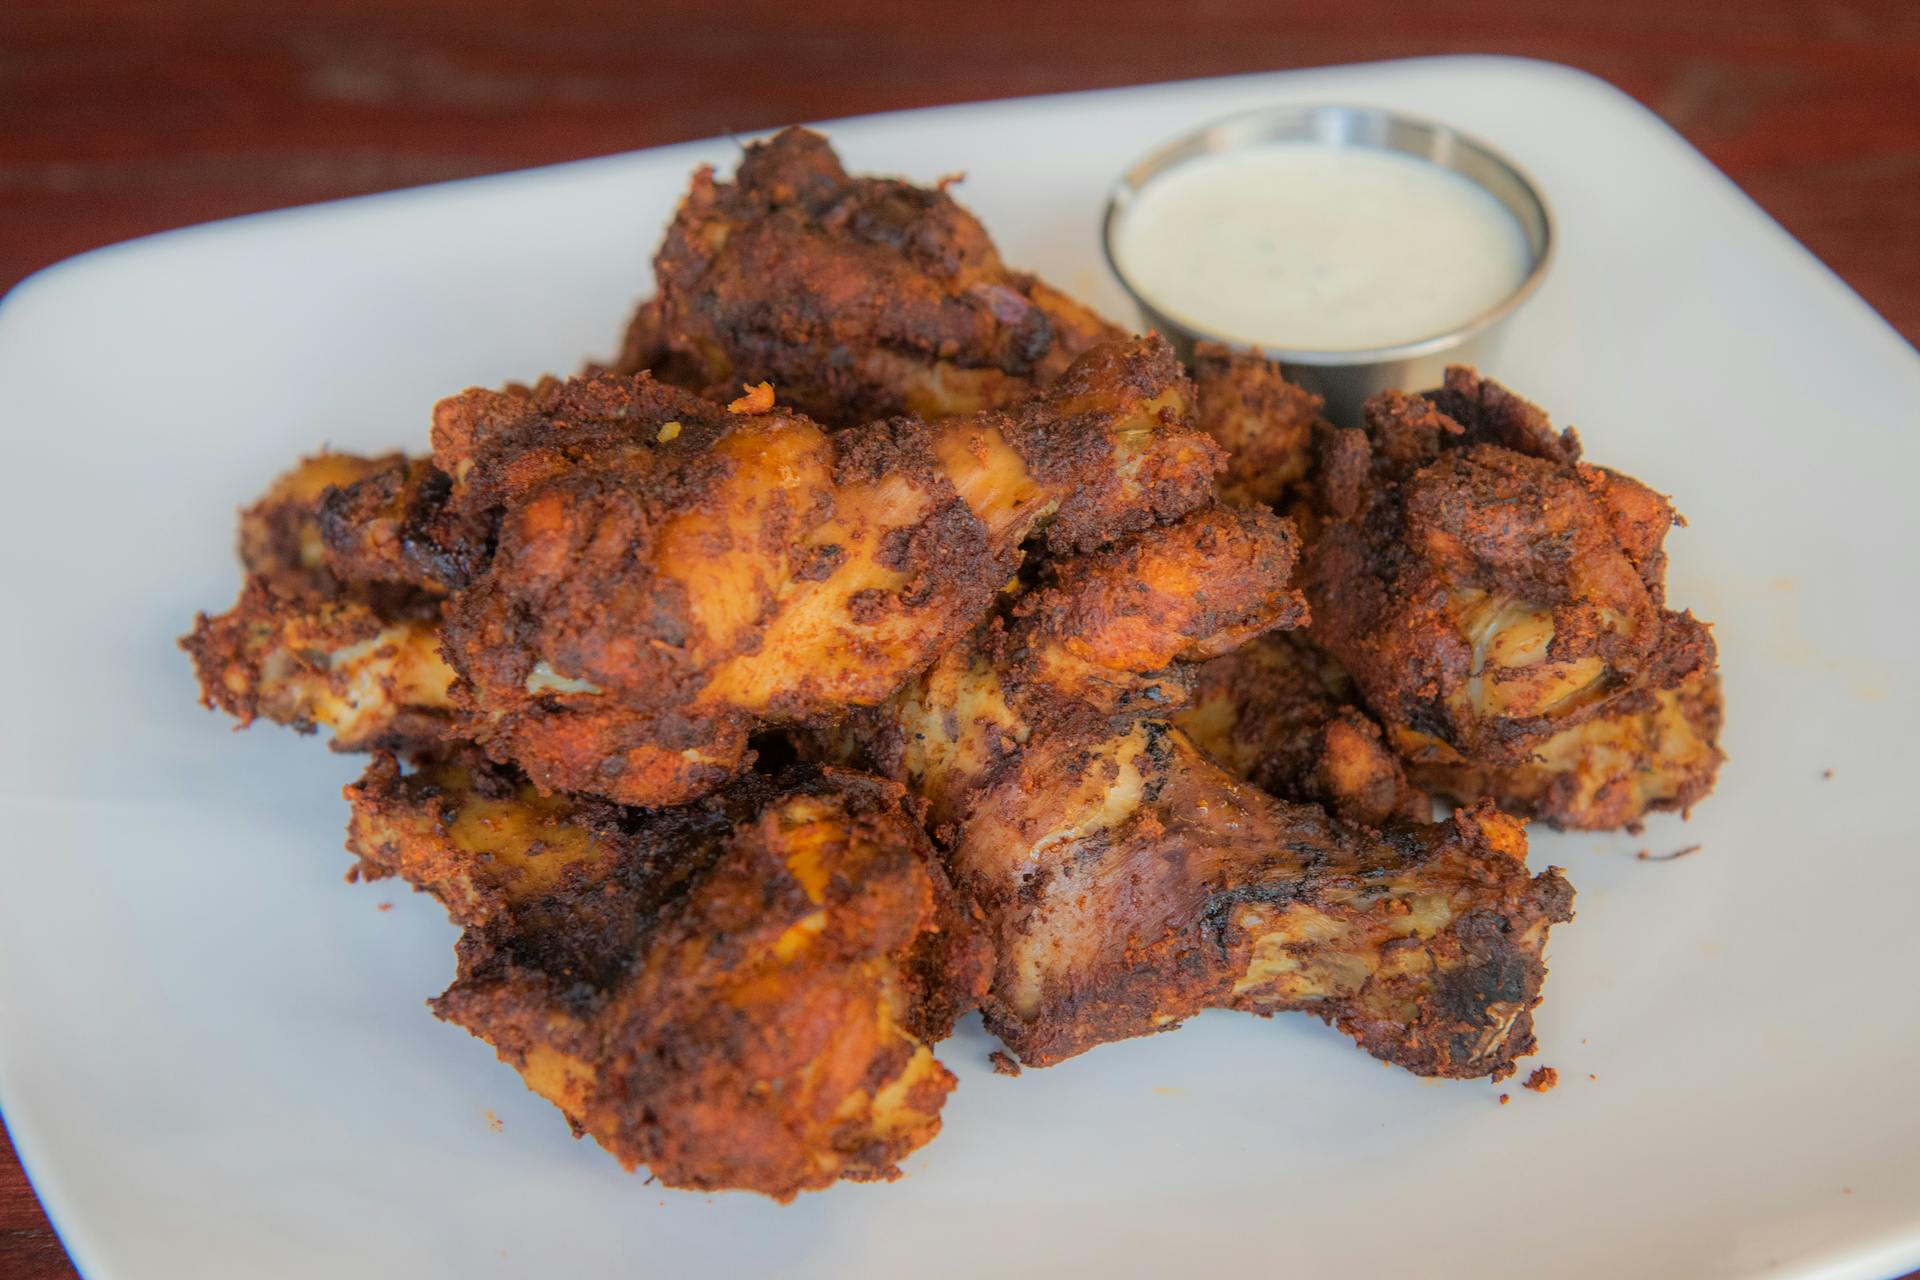 Bluestone Smoked Wings from Firehouse Grill - Chicago Ave in Evanston, IL